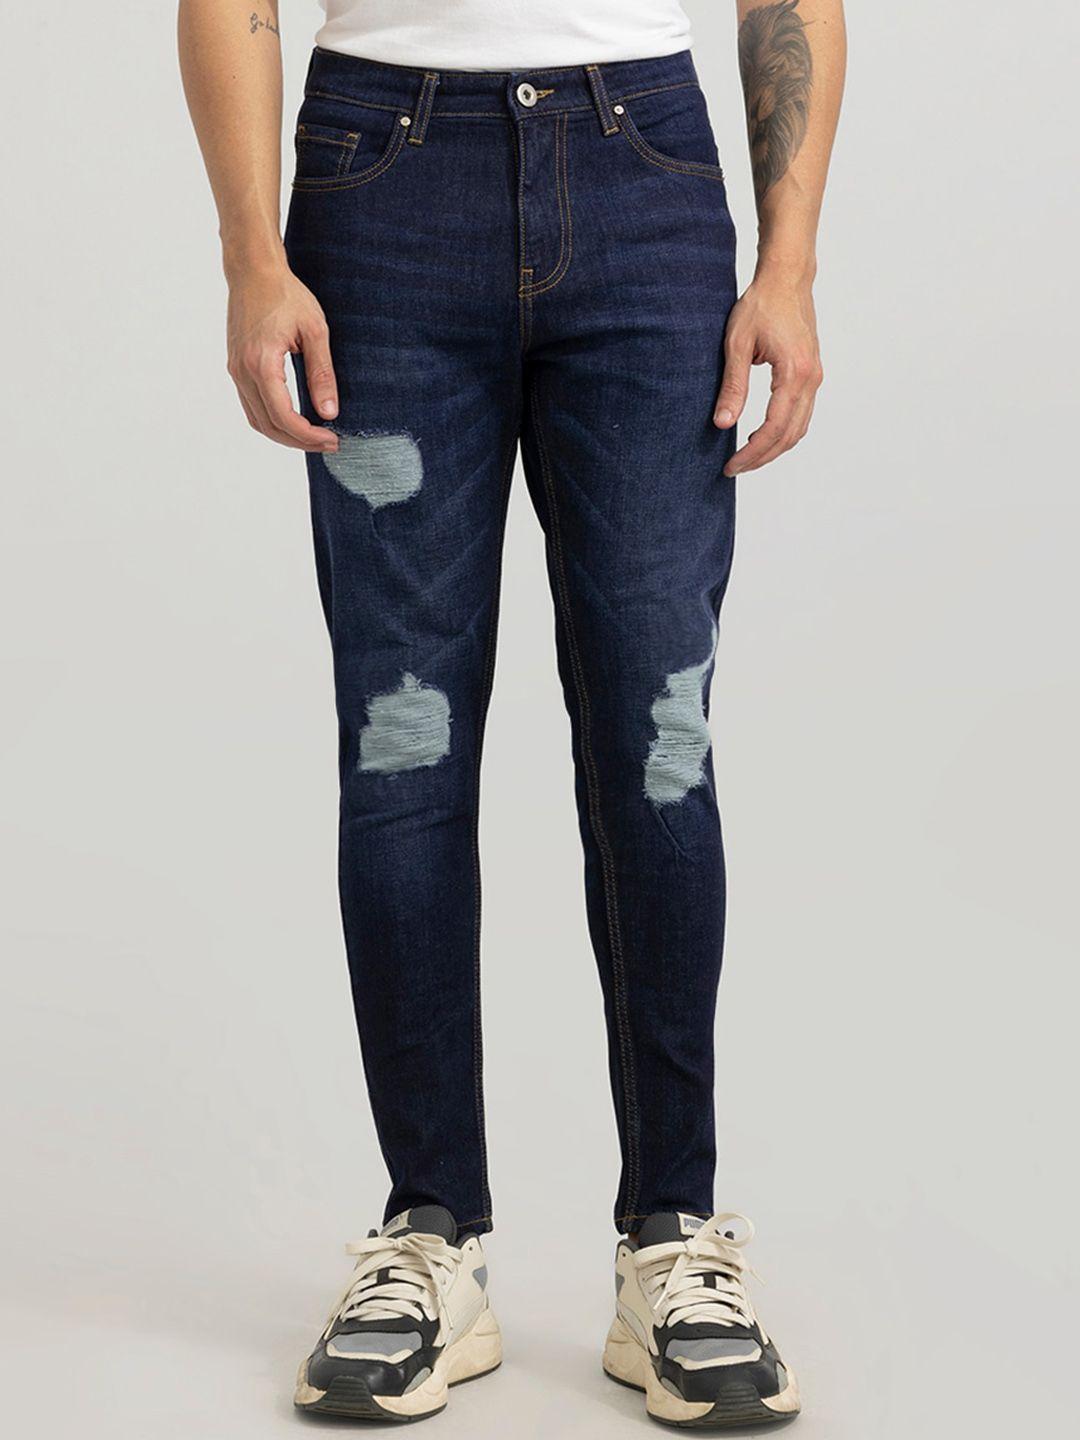 snitch-men-skinny-fit-mildly-distressed-light-fade-stretchable-jeans